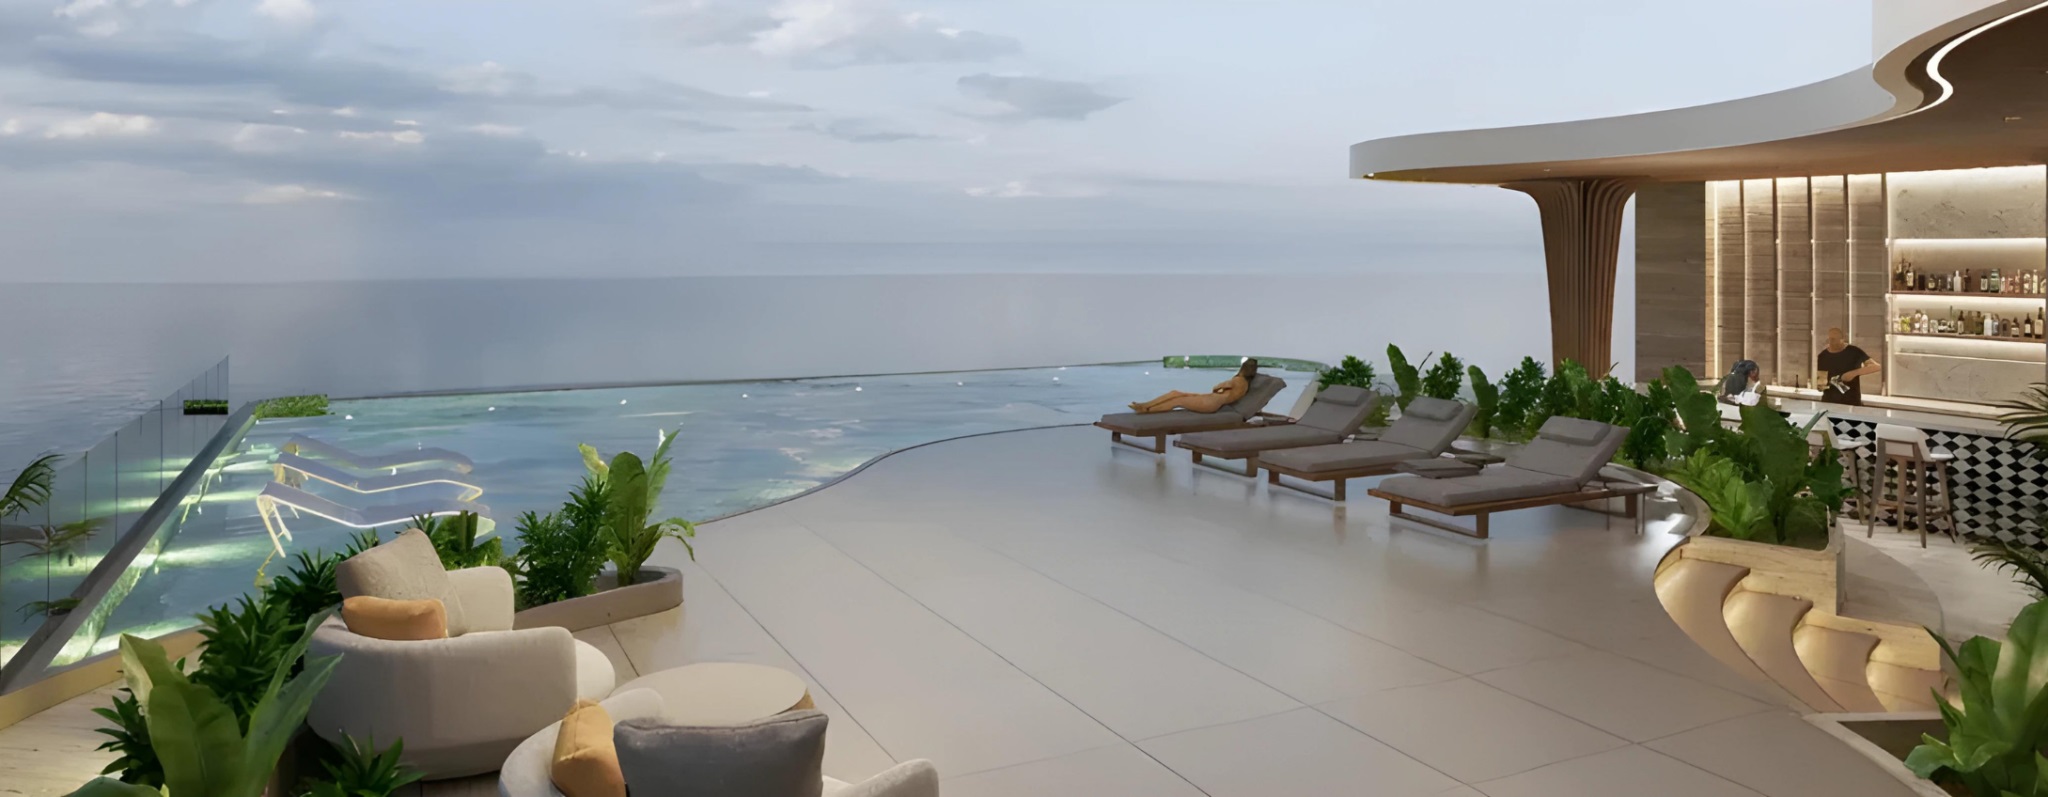 Allure-at-Punta-Pacifica-Panama-Apartments-for-sale-Rooftop-Pool.jpg